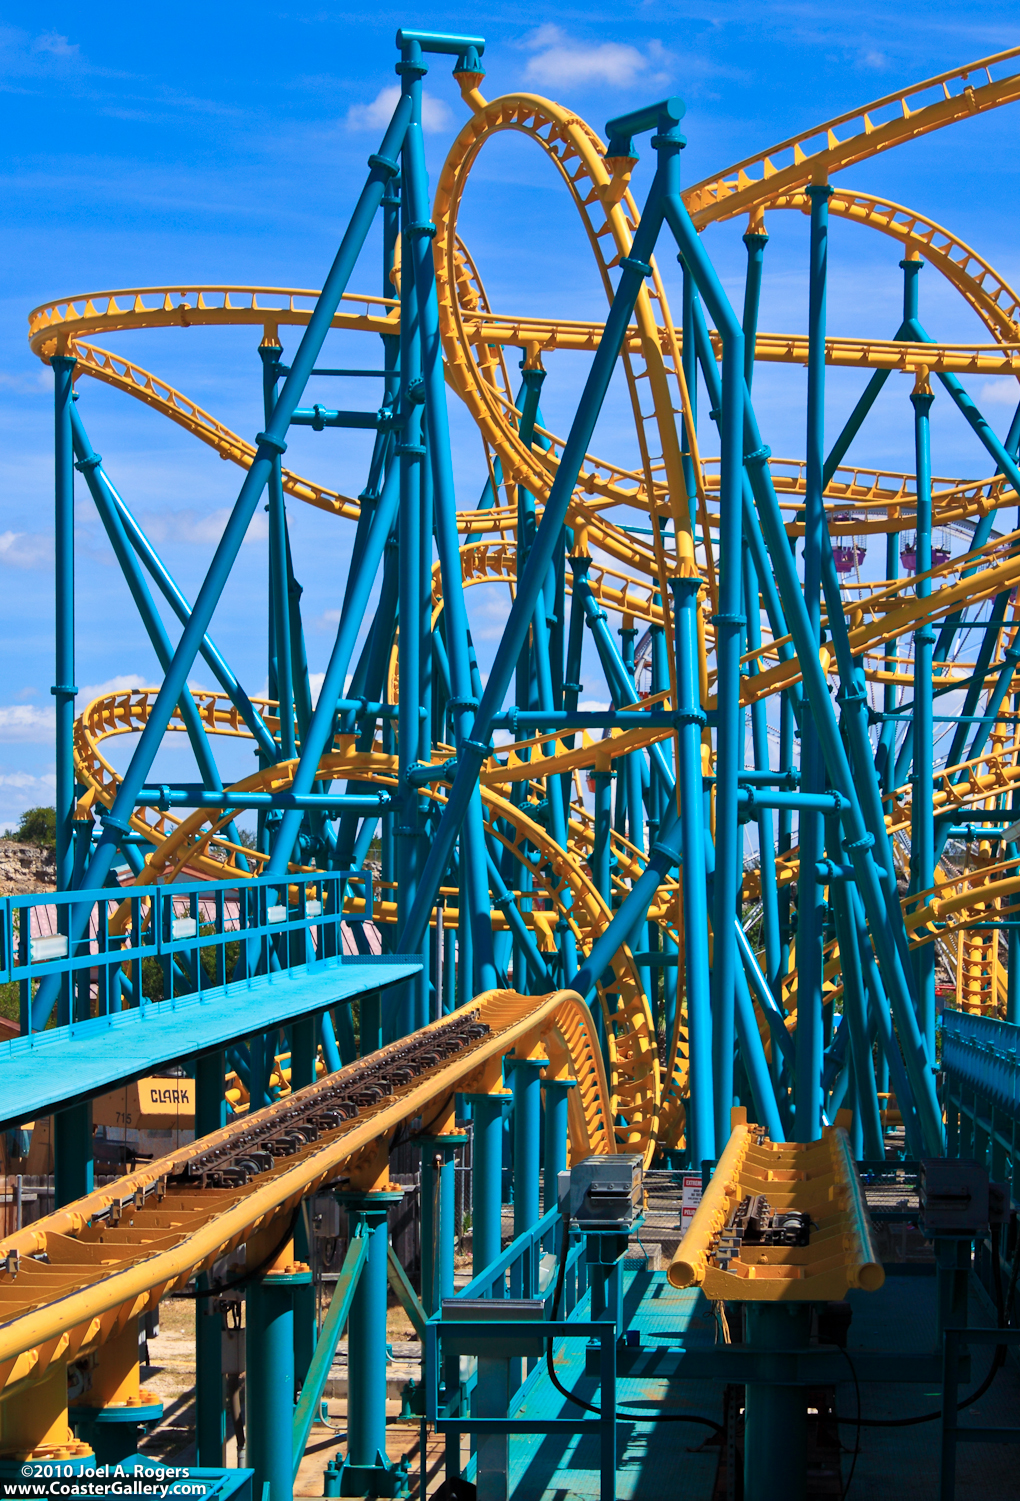 Stock image of a looping yellow and blue roller coaster at Six Flags - Cobra Roll, Sidewinder, and Corkscrew loops